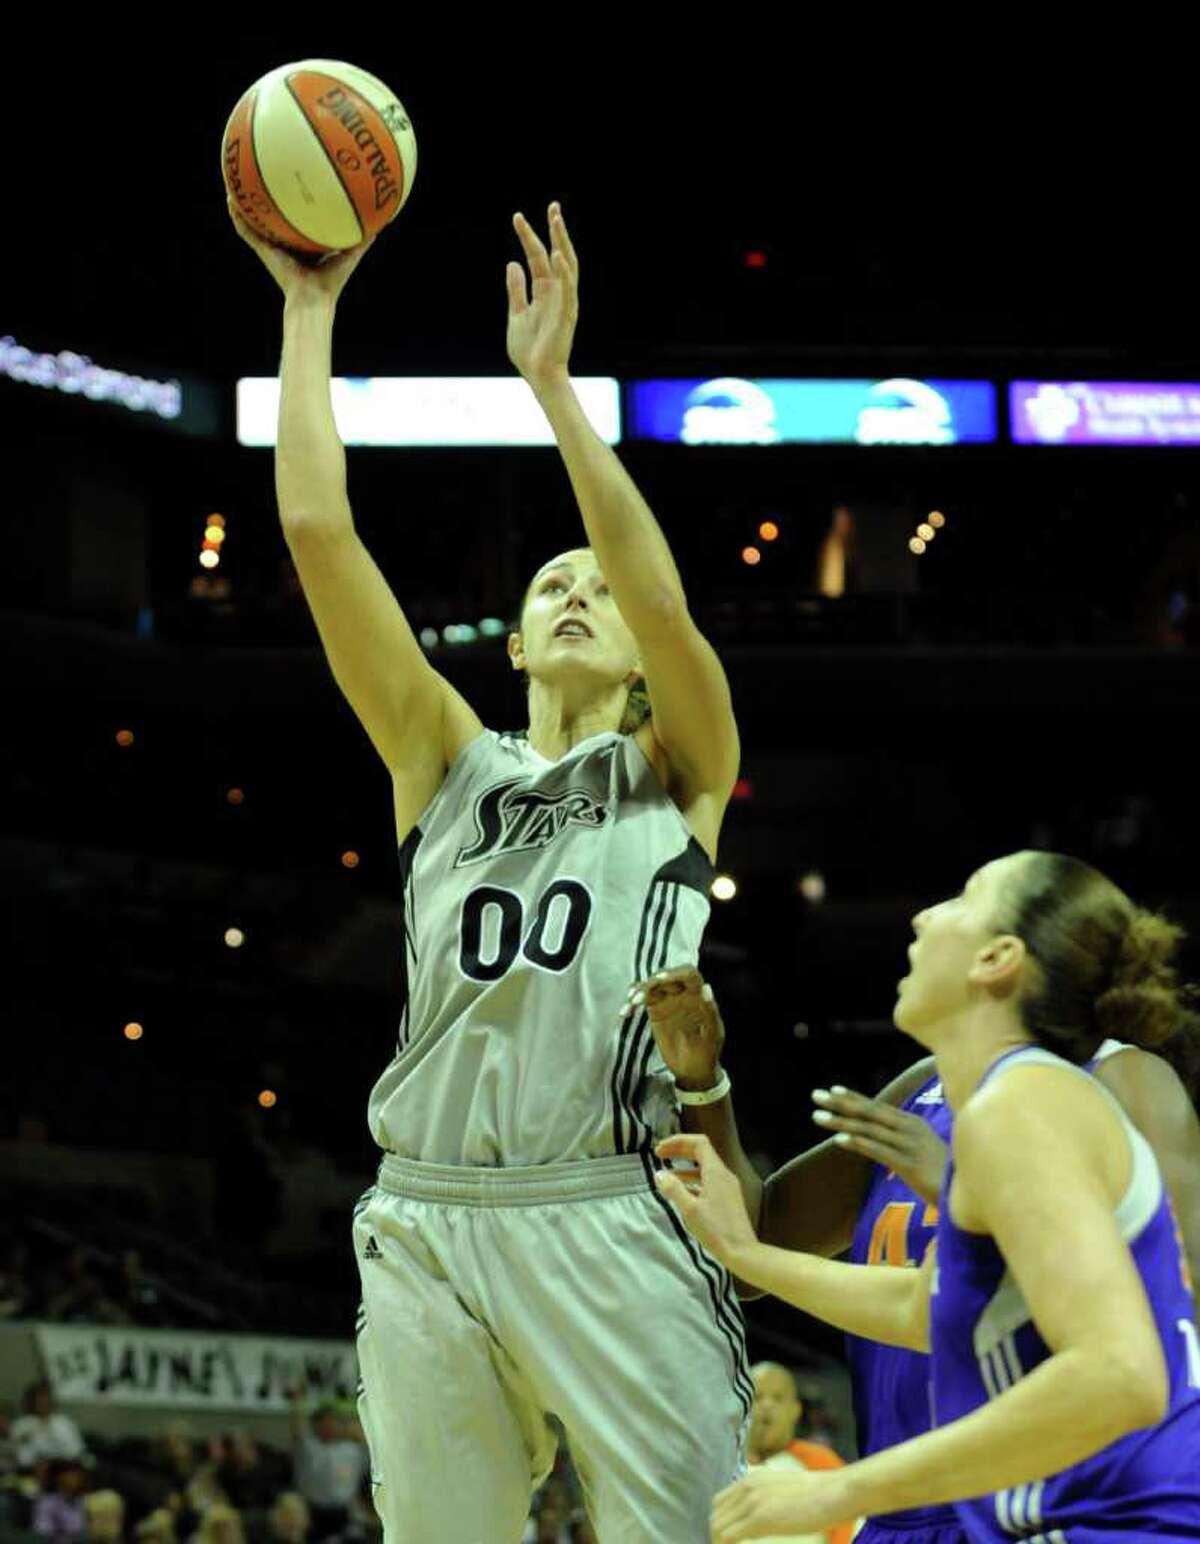 Ruth Riley shoots from within the key against the Phoenix Mercury during WNBA action at the AT&T Center on Thursday, Sept. 1, 2011. BILLY CALZADA / gcalzada@express-news.net Phoenix Mercury at San Antonio Silver Stars